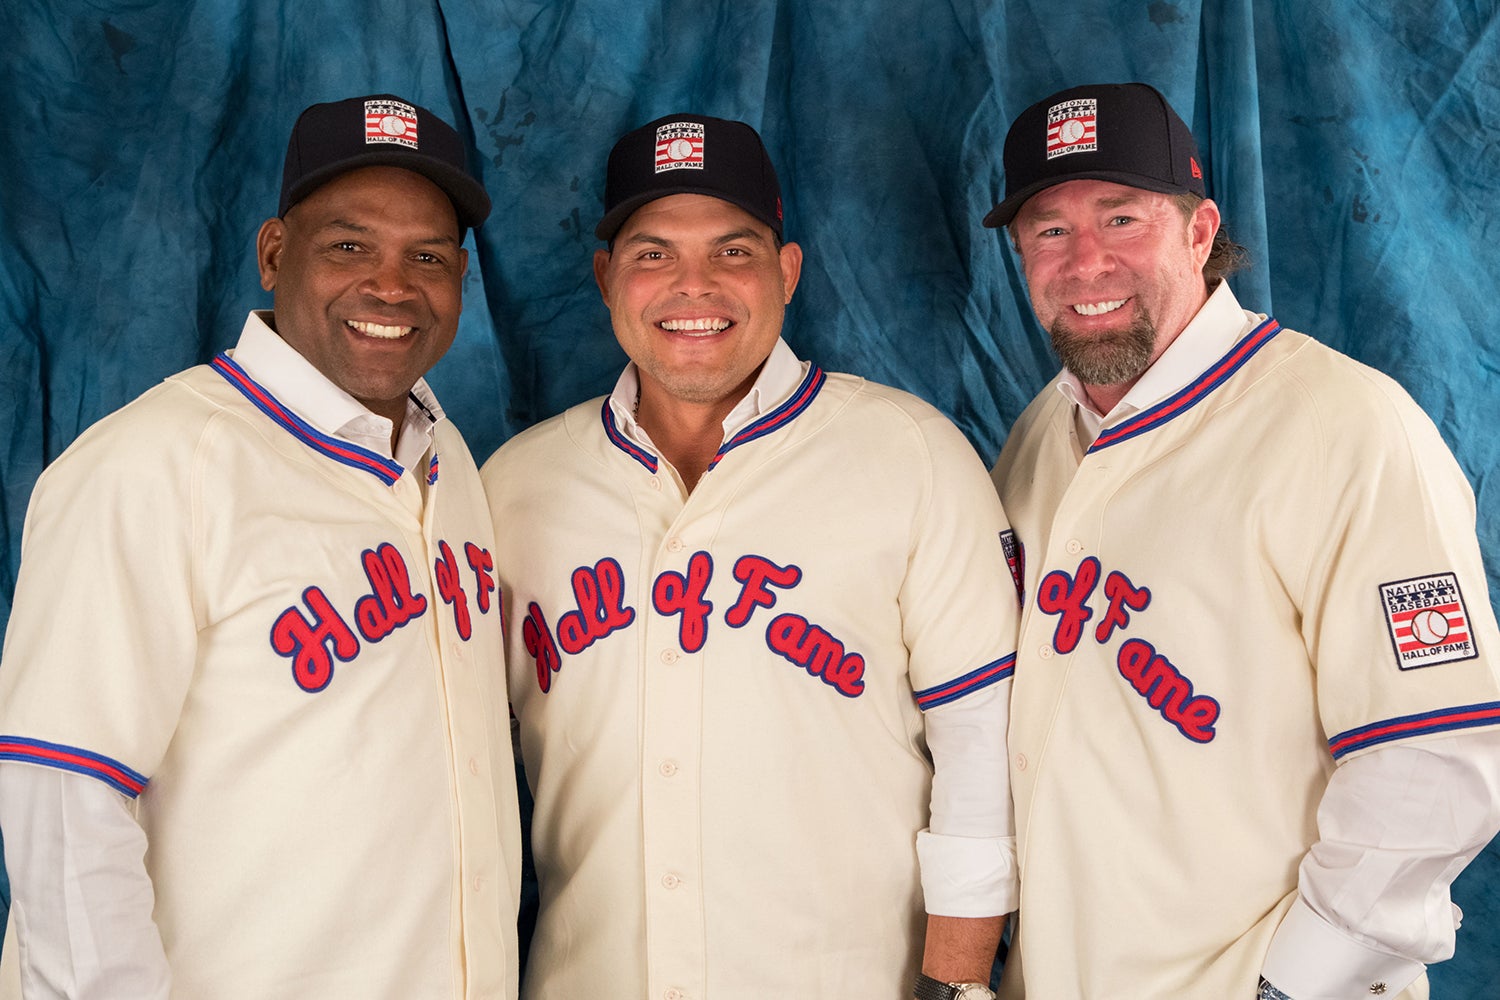 Hall of Fame Weekend 2017 to Feature Inductions of  Jeff Bagwell, Tim Raines, Iván Rodríguez,  John Schuerholz, Bud Selig, July 28-31 in Cooperstown